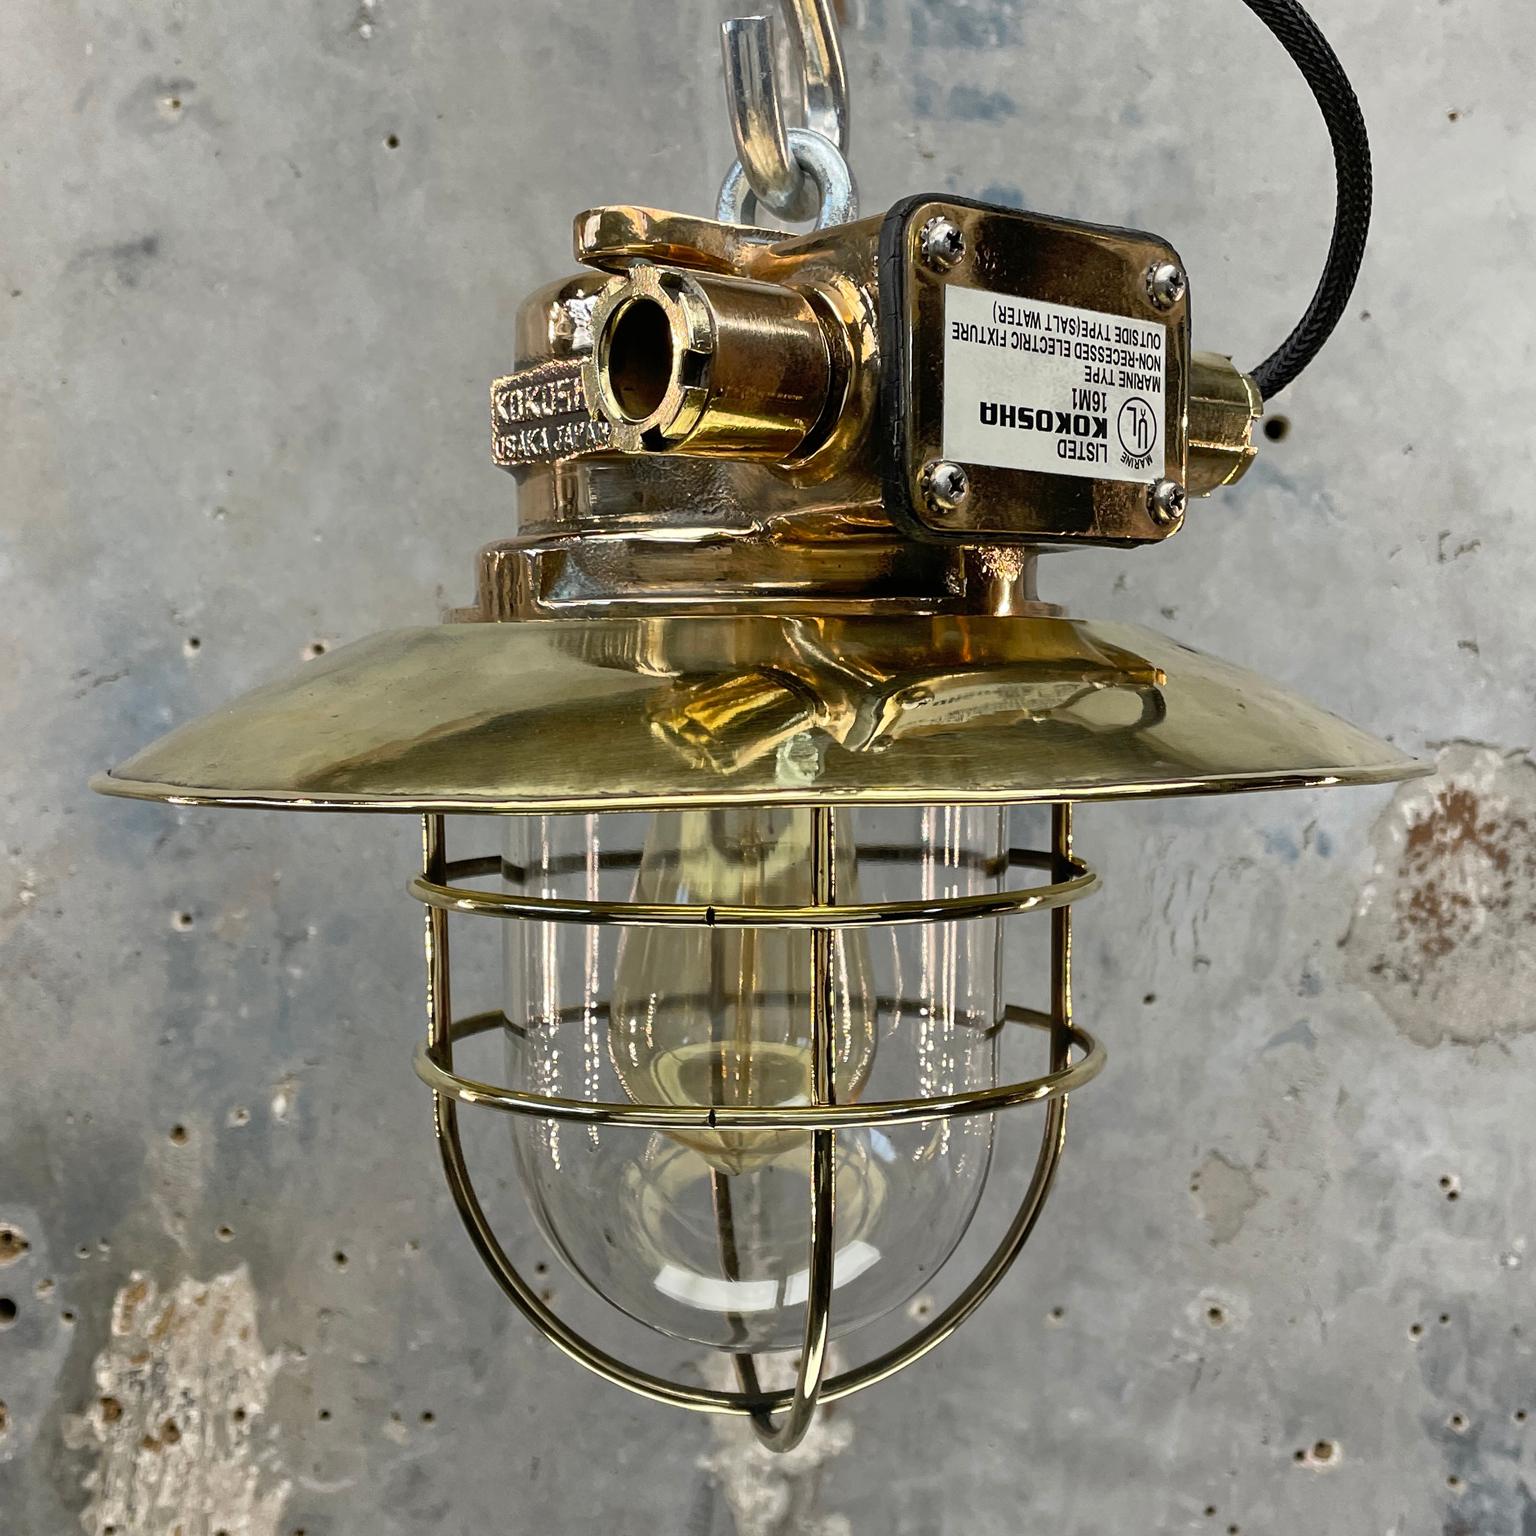 A cast bronze marine Industrial ceiling pendant lamp originating from Osaka Japan made by Kokosha who are a manufacturer of fixtures and fittings for hazardous areas within the marine industry.

These fixtures have been expertly restored with a